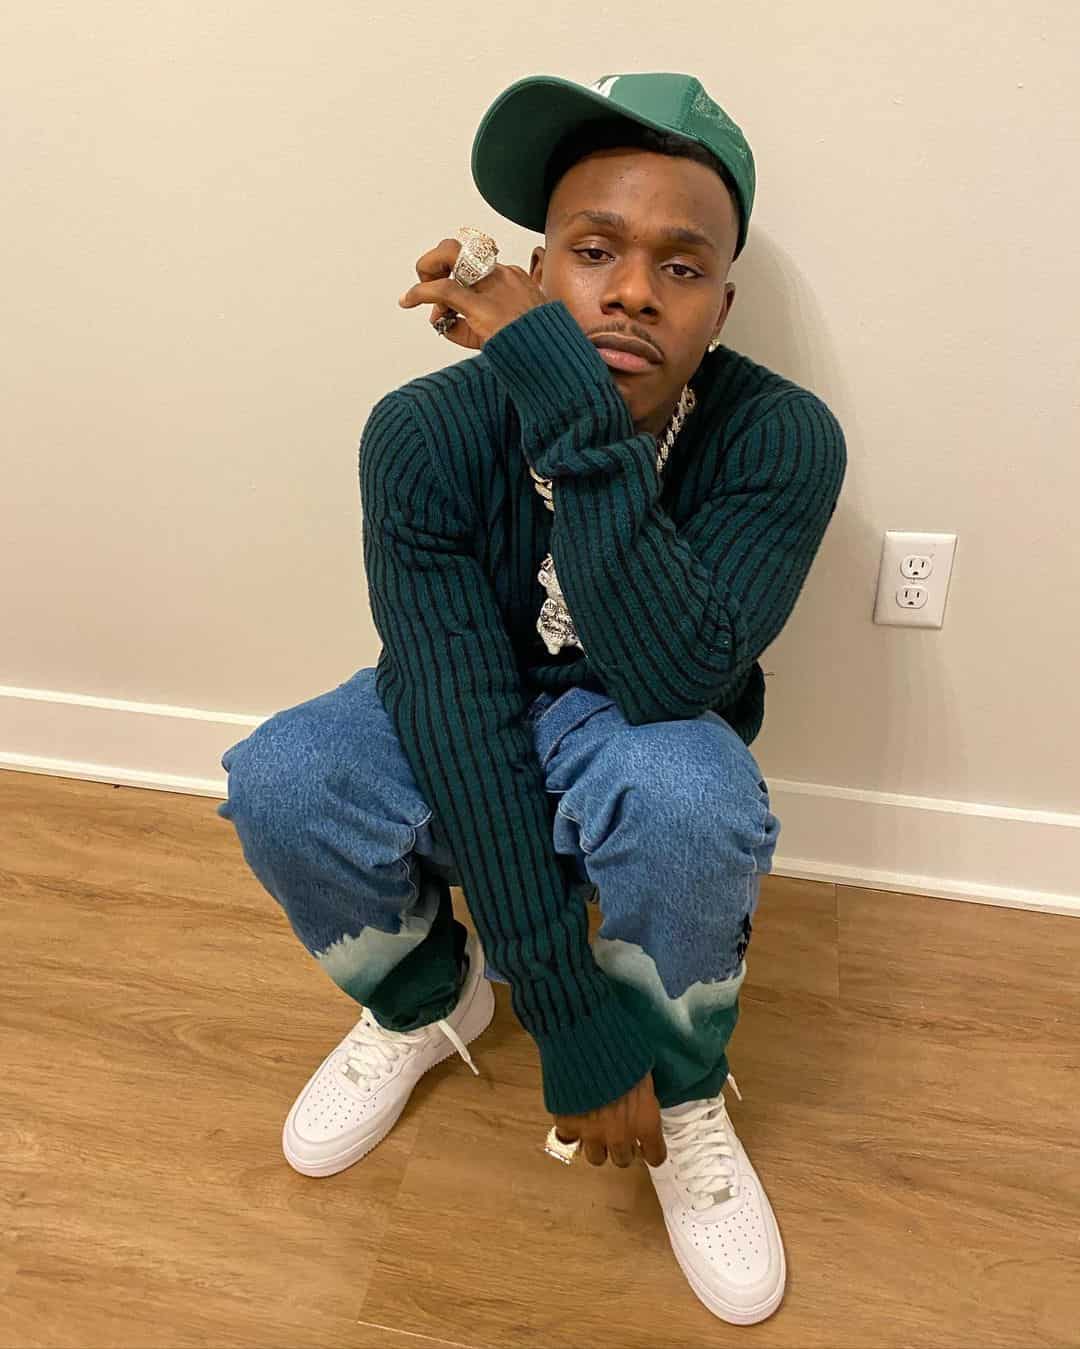 DaBaby - Biography, Profile, Facts, and Career